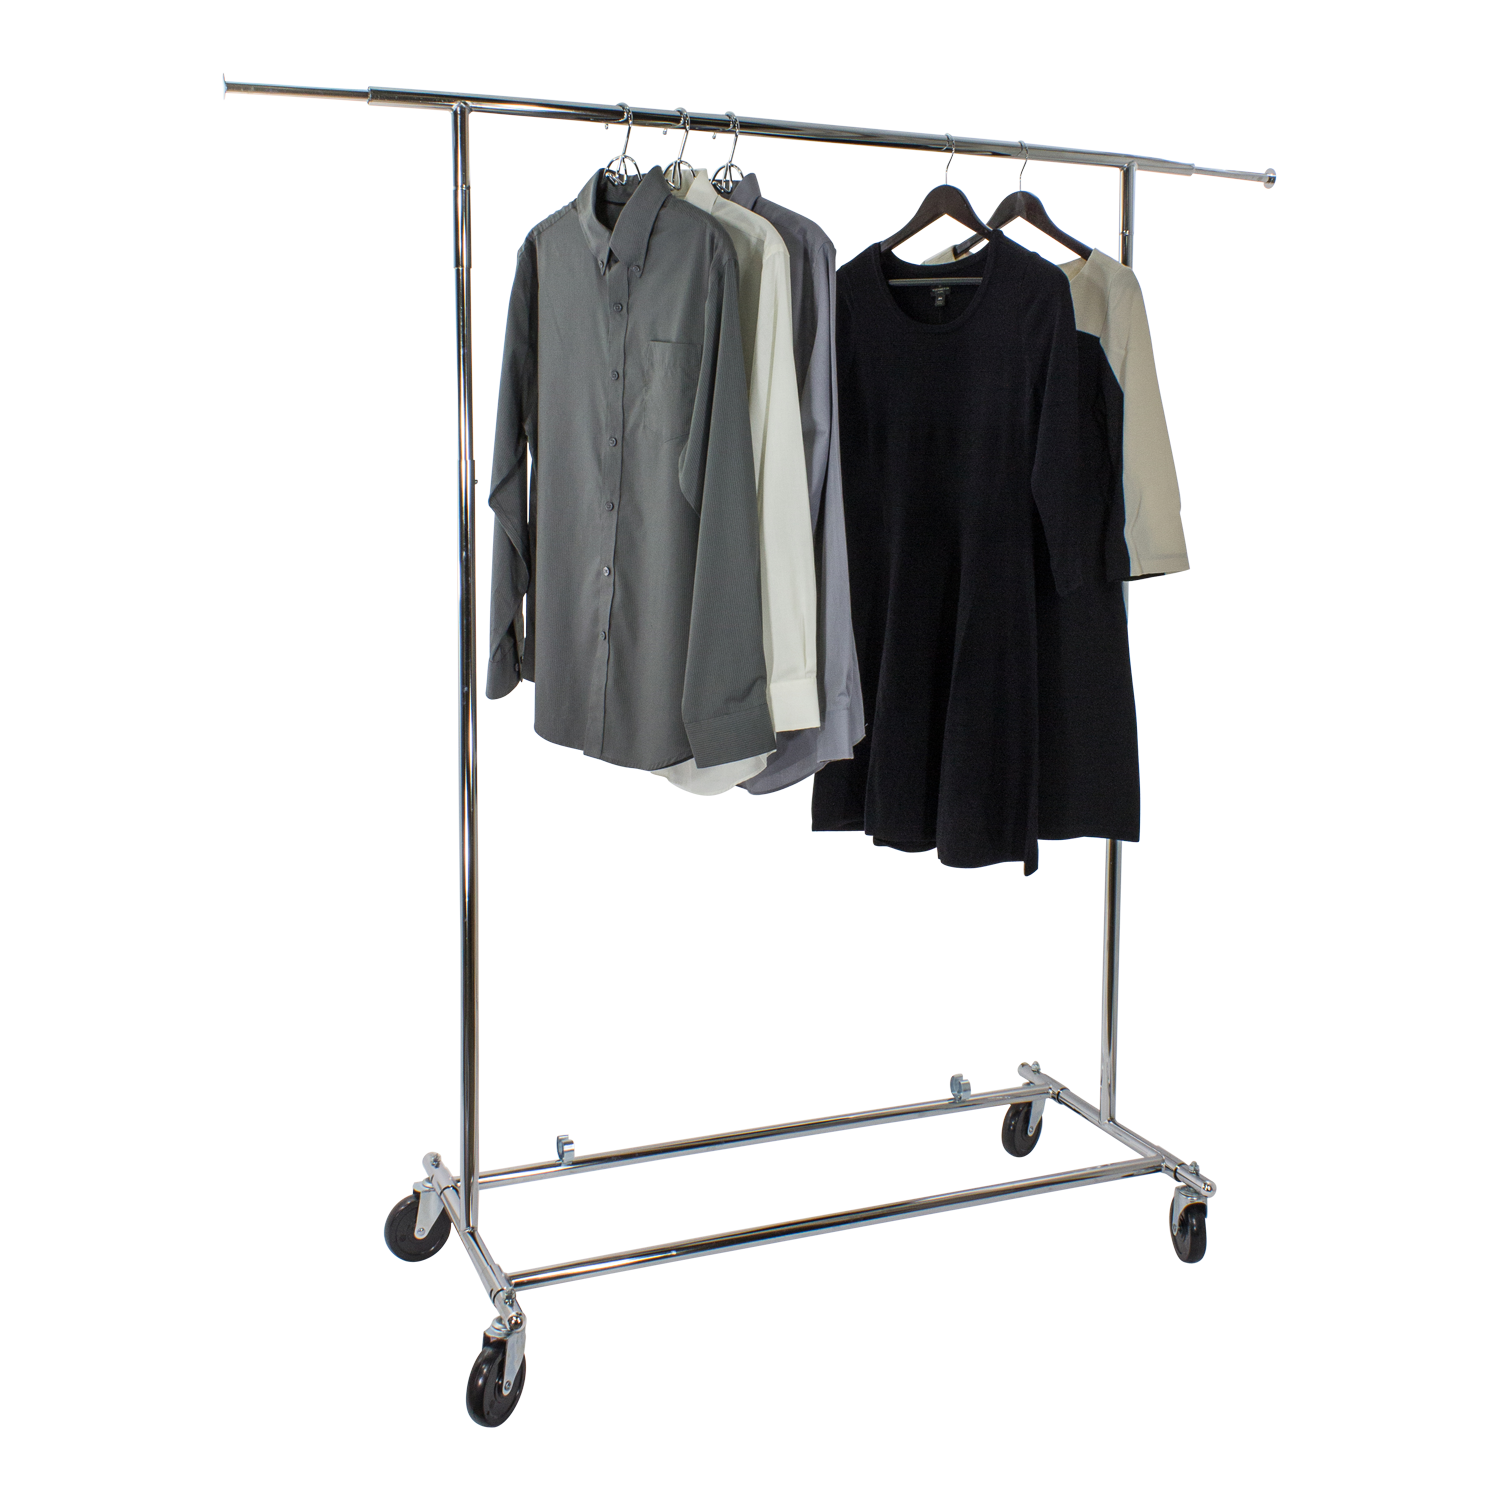 Clothes Valet Free HQ Image PNG Image